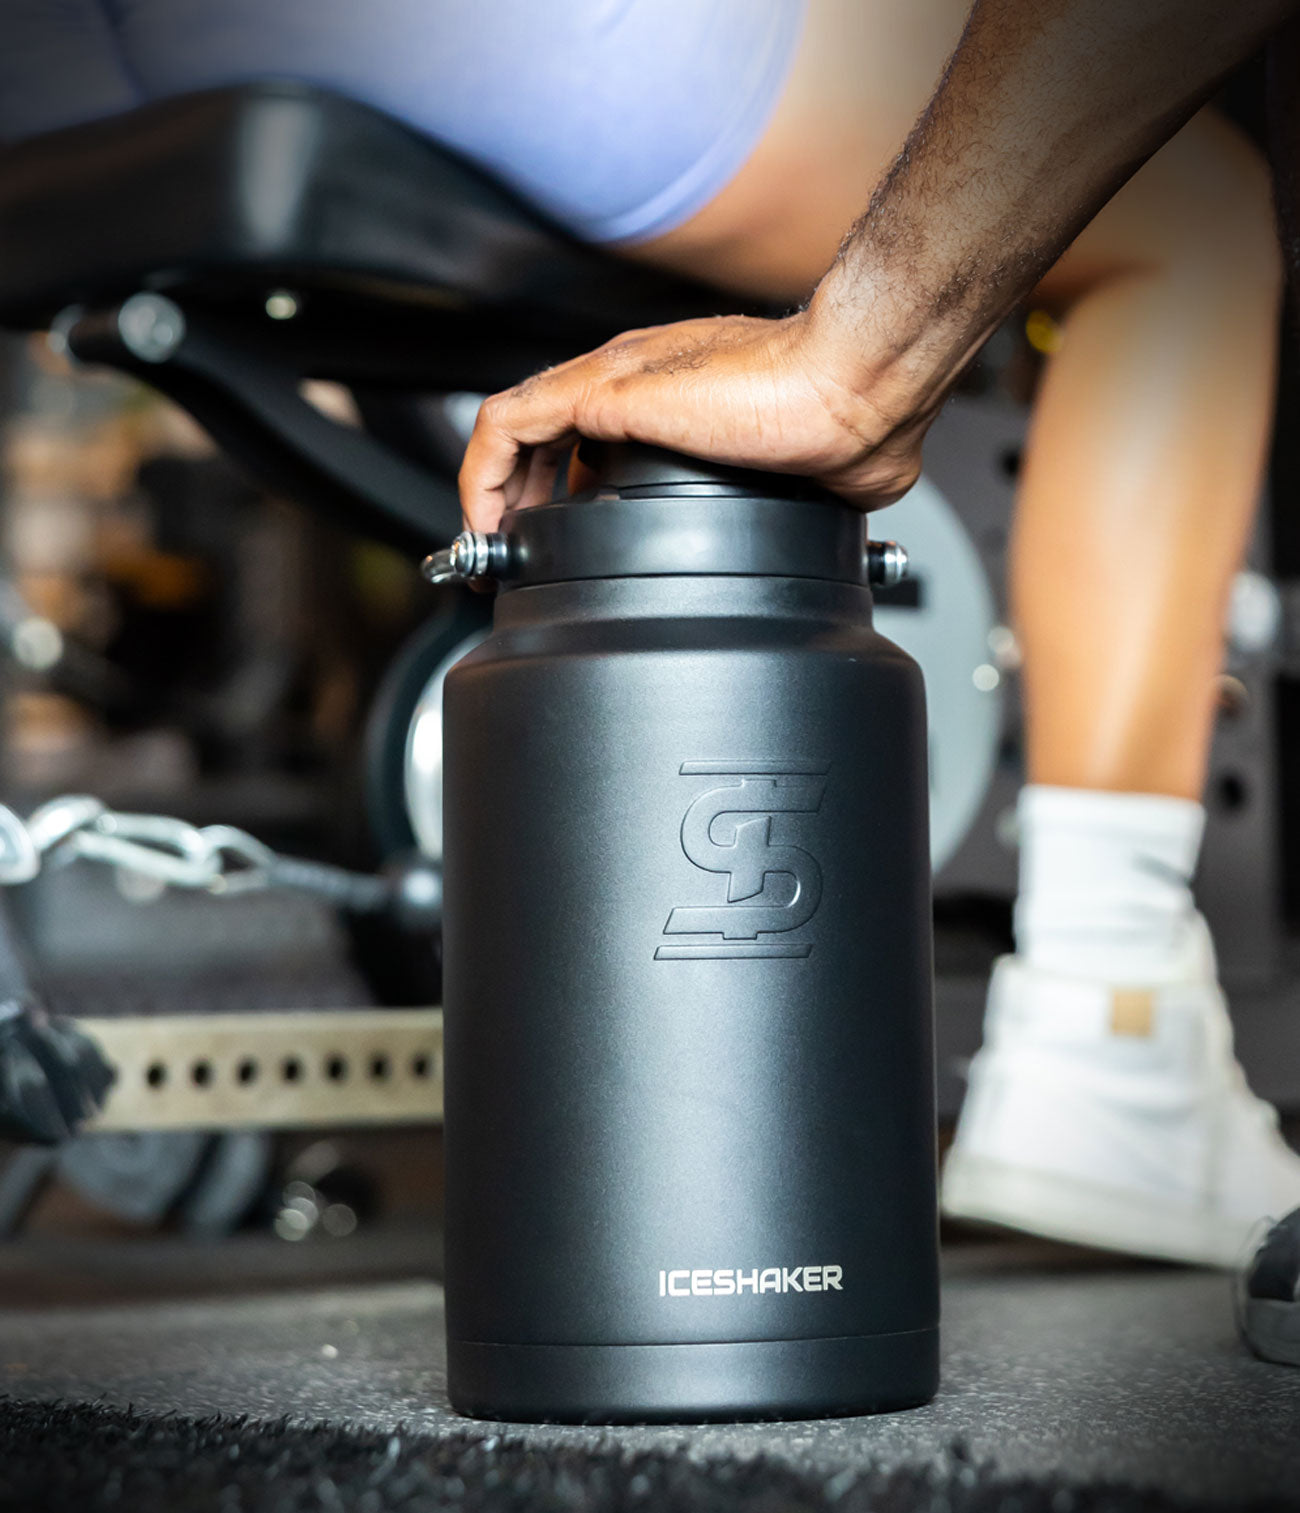 An image of a Black Ice Shaker One Gallon Jug sitting on a gym floor as people workout in the background.